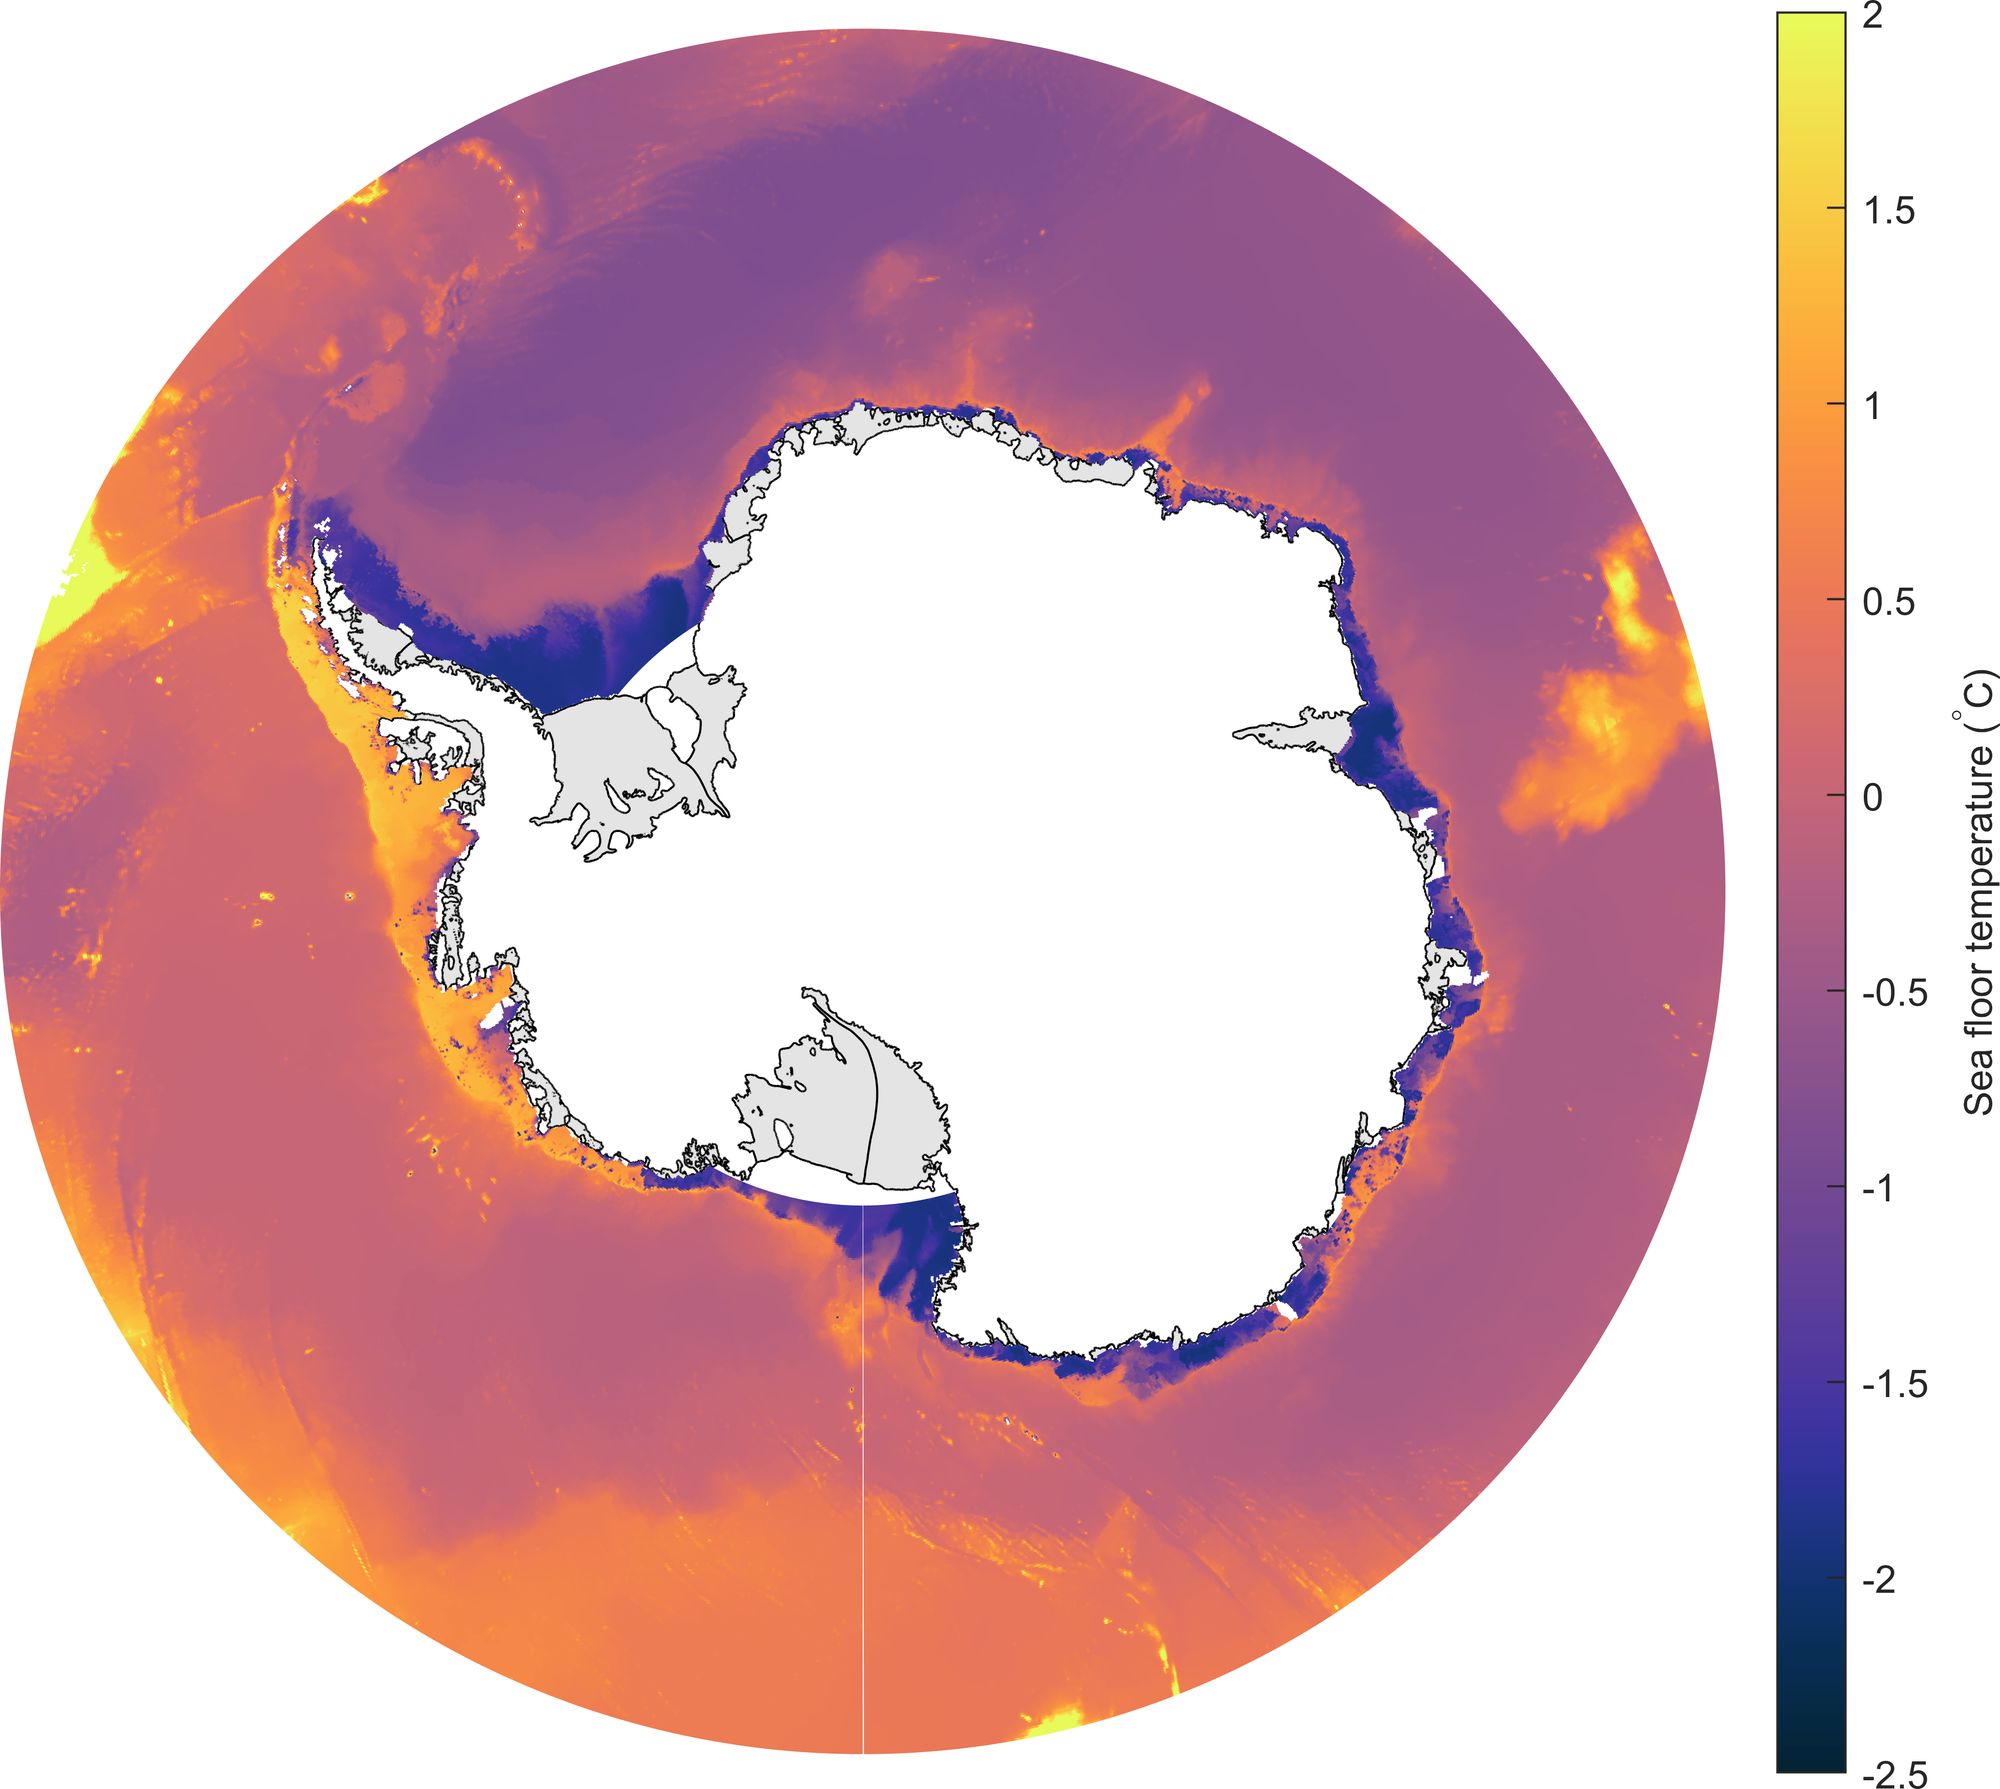 A graphic showing in different colors how warm or cold the waters are around Antarctica.  Yellow is areas with a temperature of +2°C, while dark blue is water with a temperature of -1.5°C.